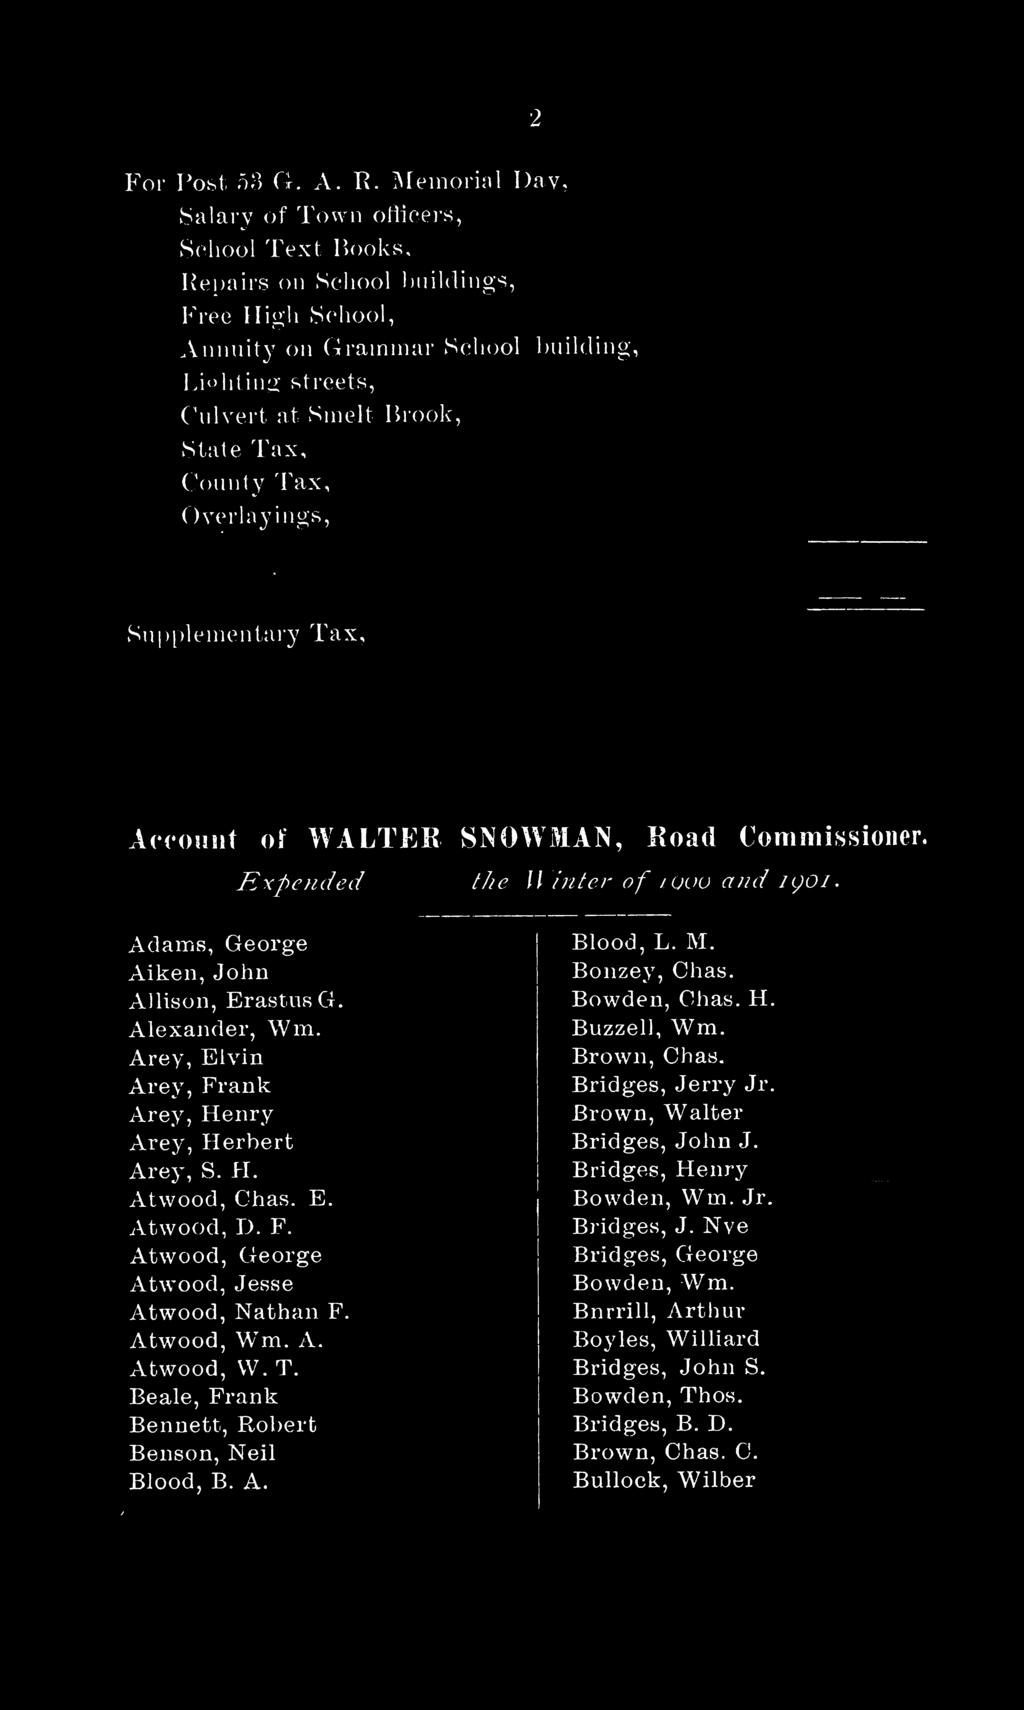 County Tax, V Overlayings, Supplementary Tax, Account of WALTER SNOWMAN, Road Commissioner. E xpended duringthe Winter o f 190and 1901. Adams, George Aiken,John Allison, ErastusG. Alexander, Wm.